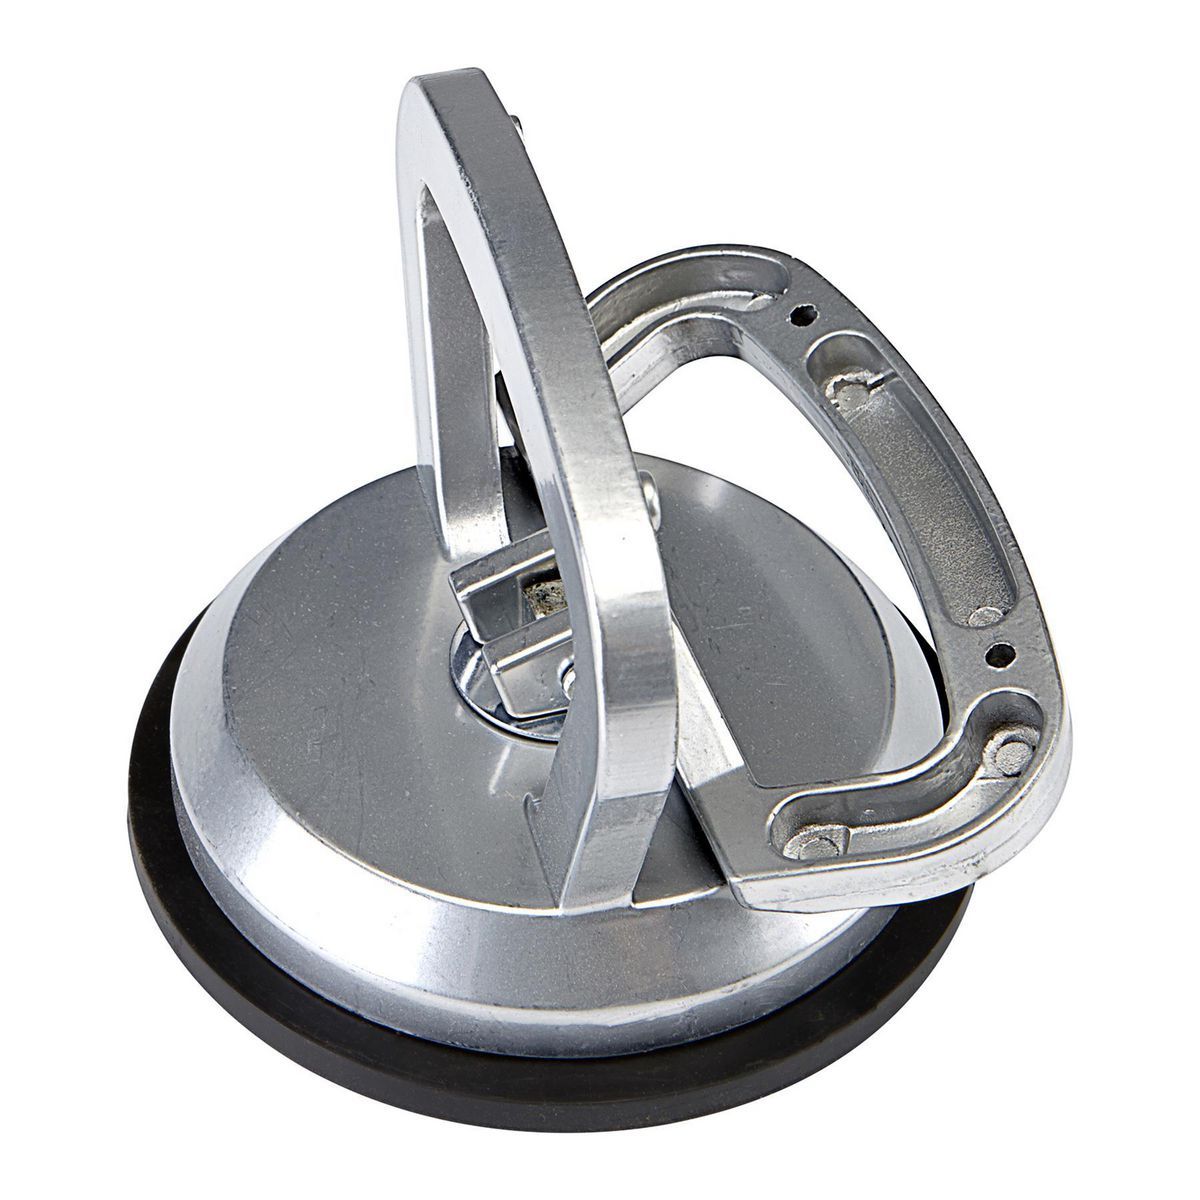 4-5/8 in. Aluminum Suction Cup Lifter - 110 lb.